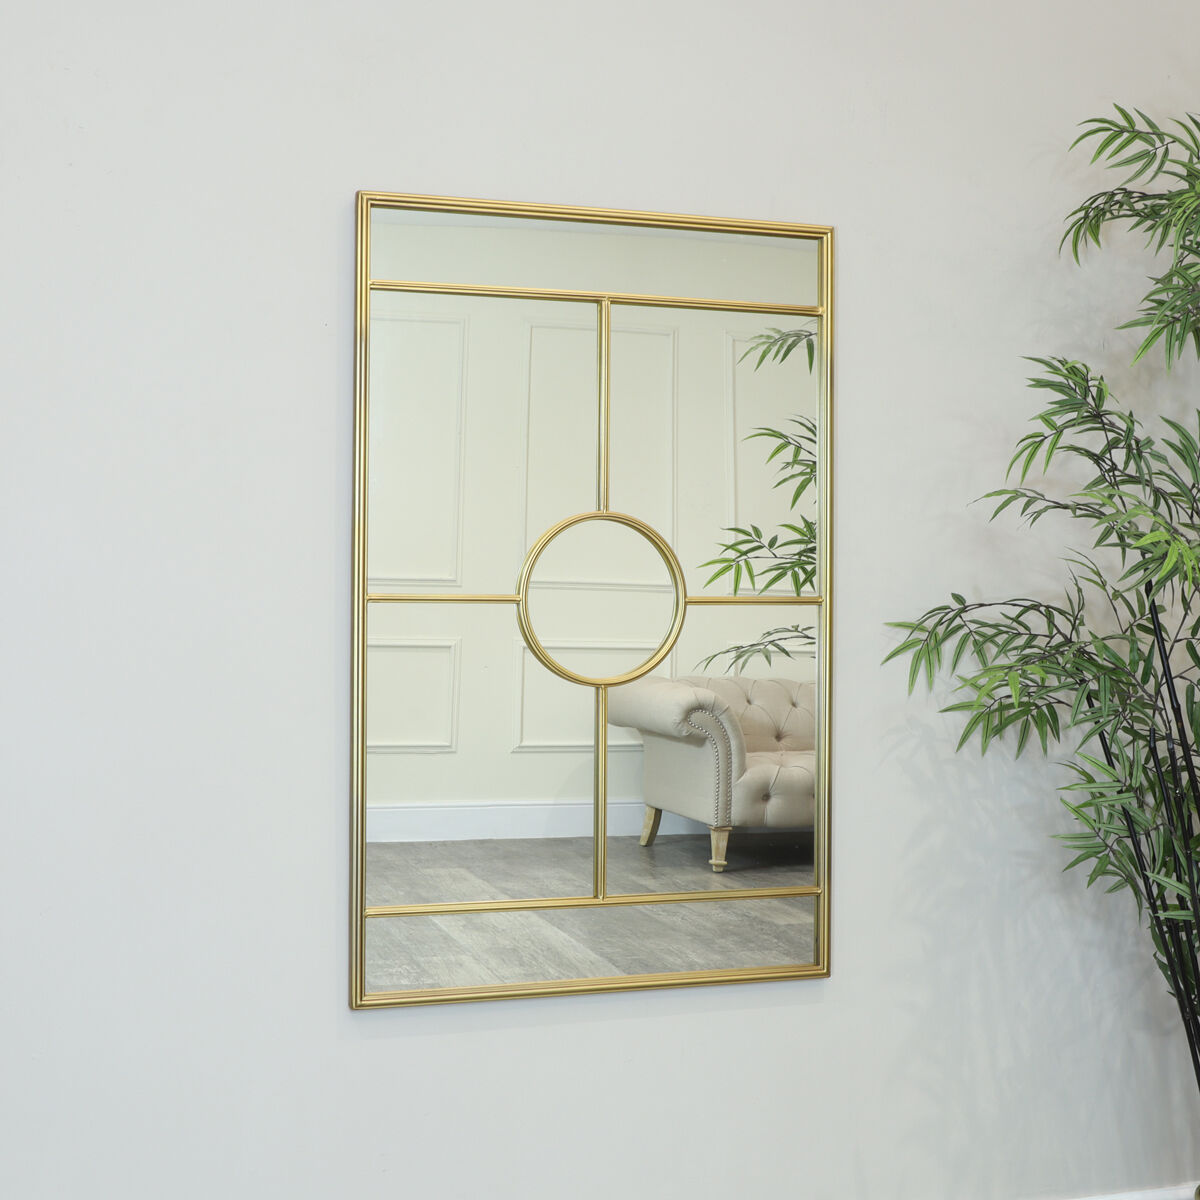 Ornate Gold Framed Wall Mirror 110cm x 70cm Material: Metal / Glass